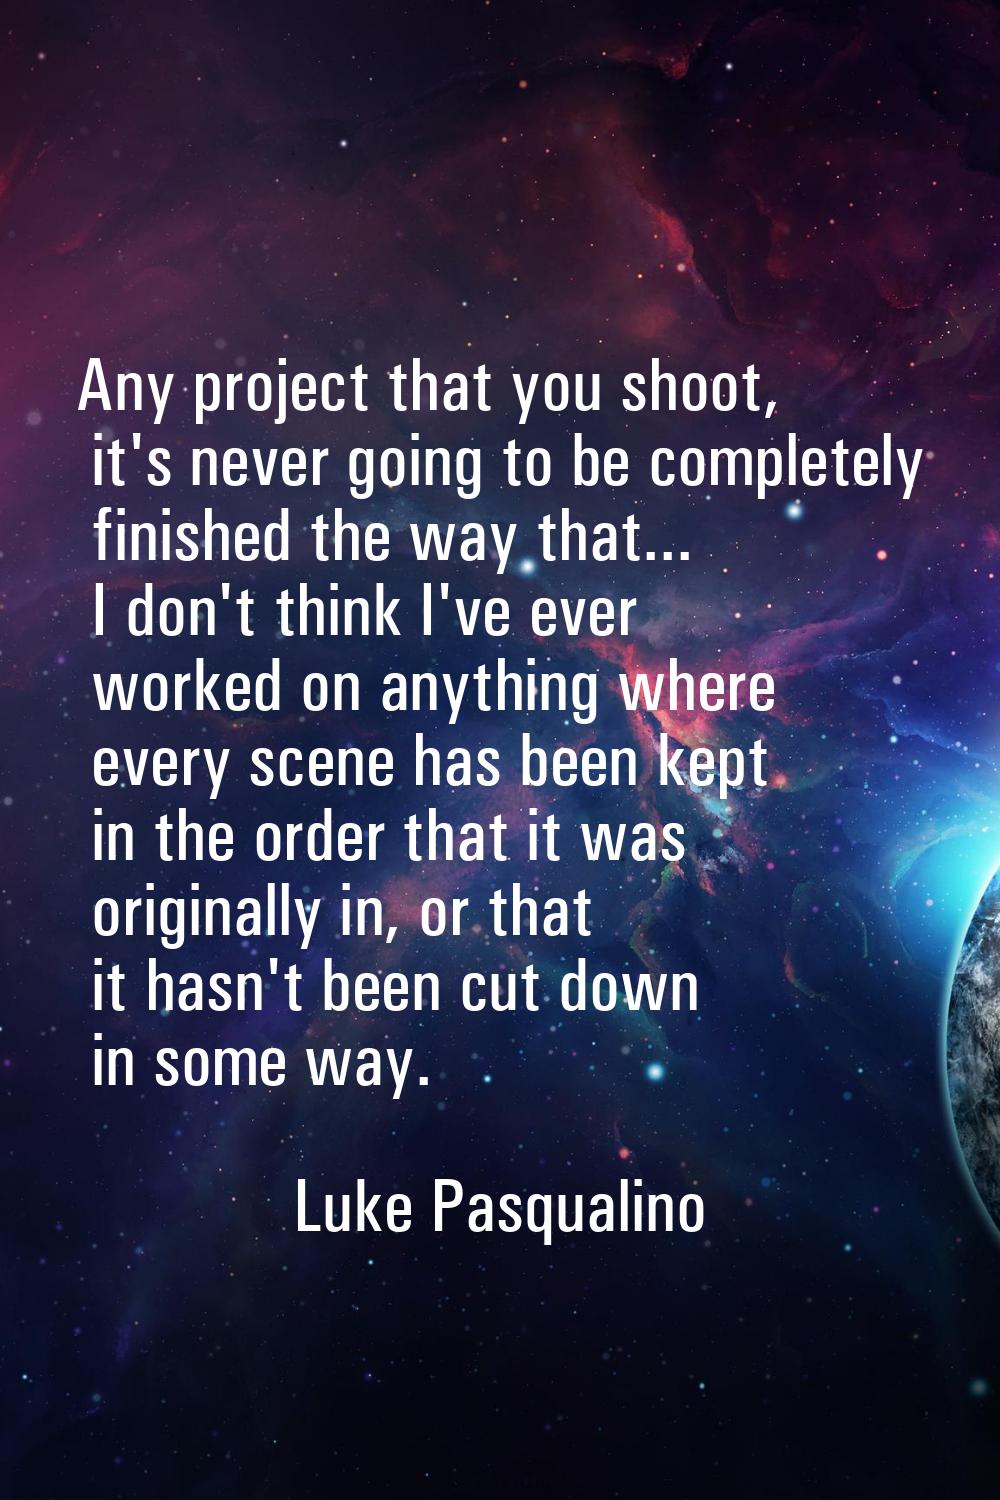 Any project that you shoot, it's never going to be completely finished the way that... I don't thin